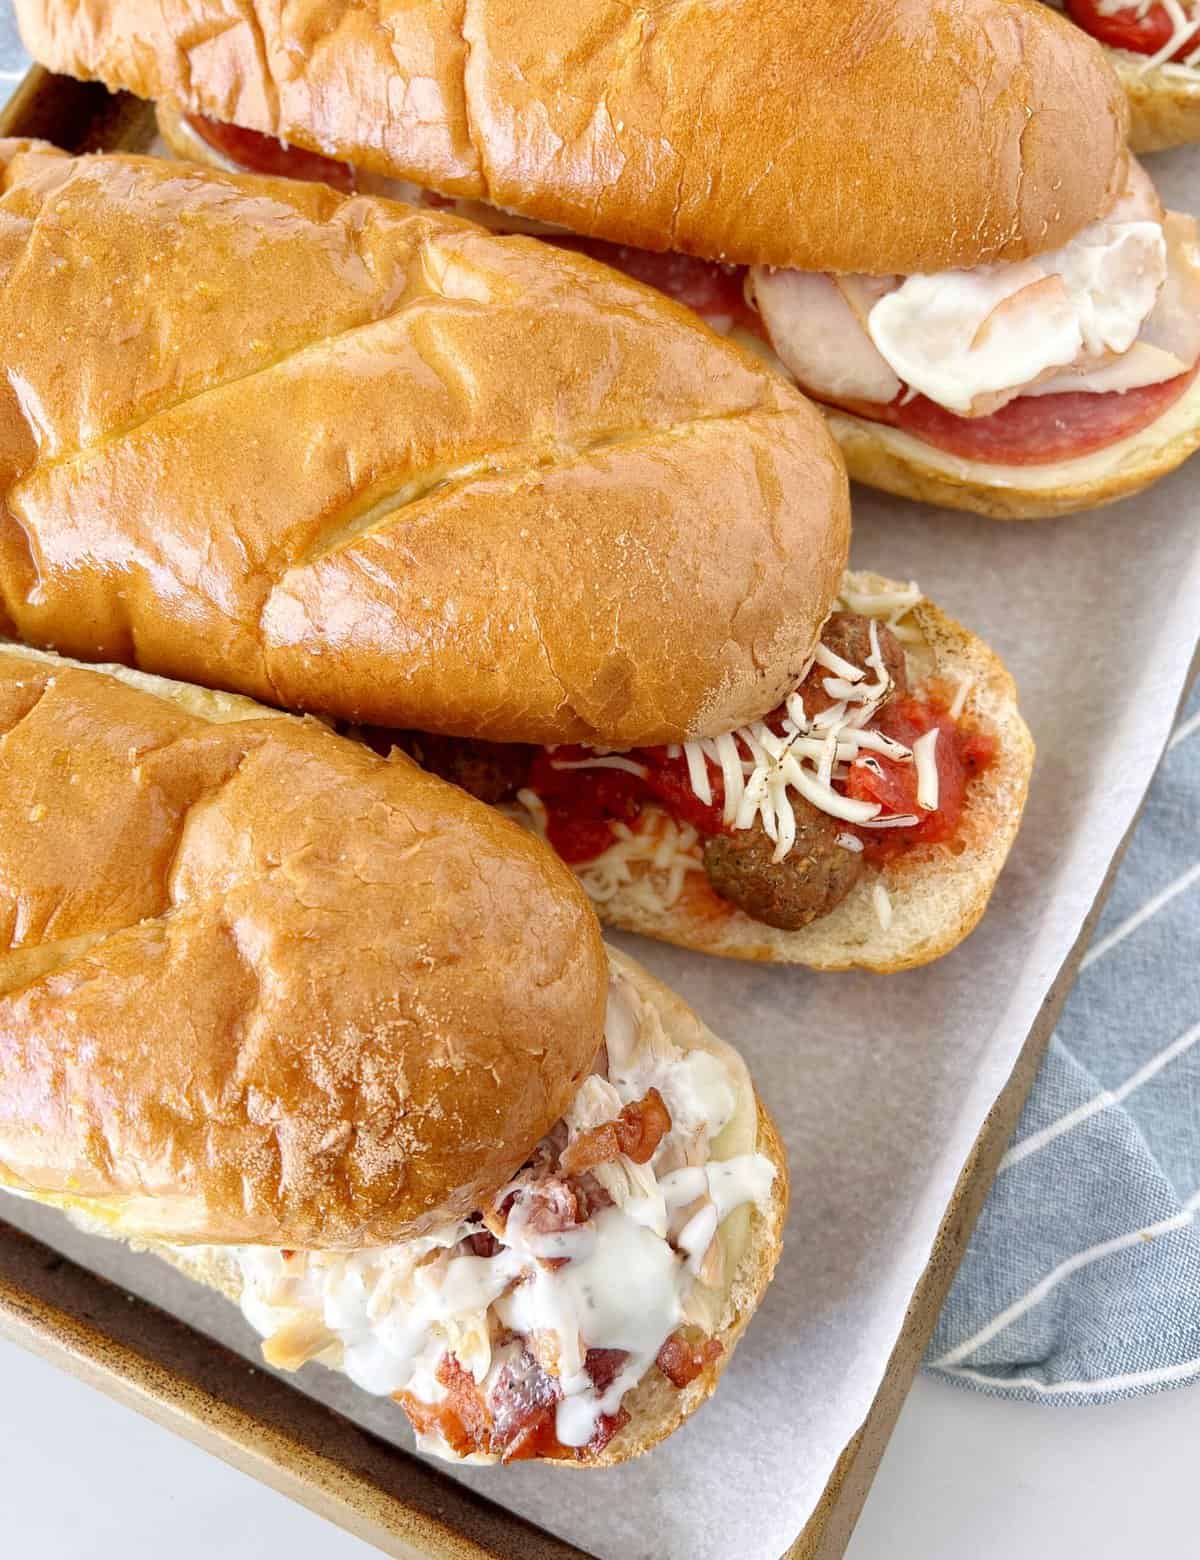 baked sandwiches 